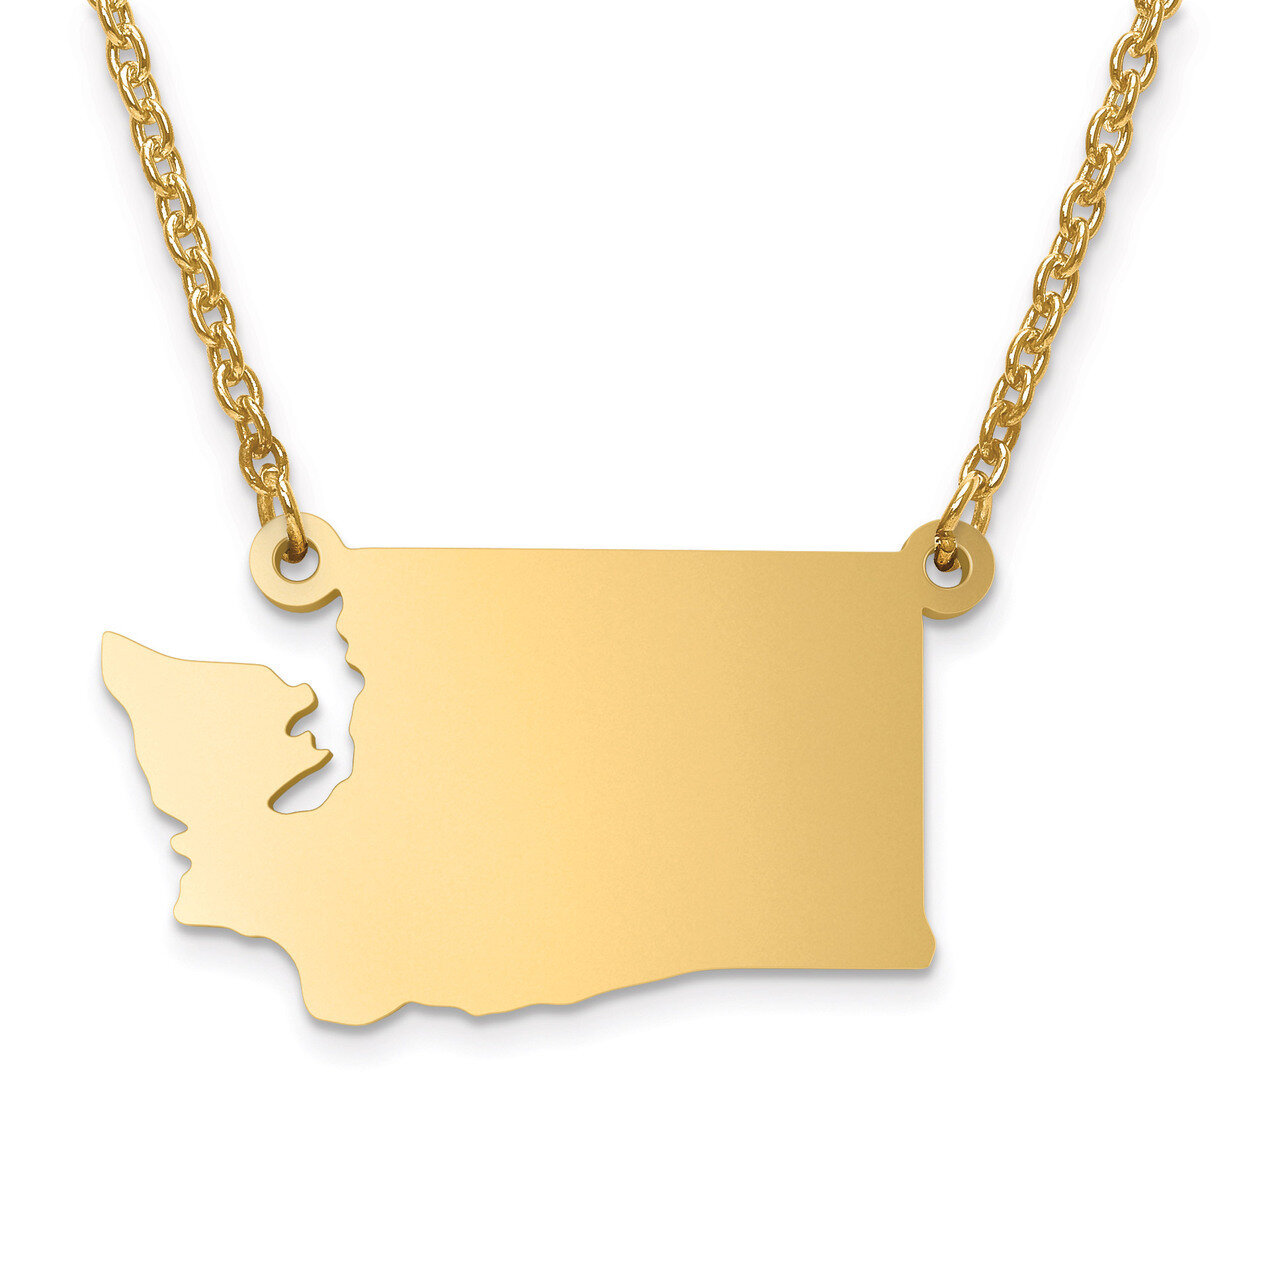 Washington State Pendant with Chain Engravable Gold-plated on Sterling Silver